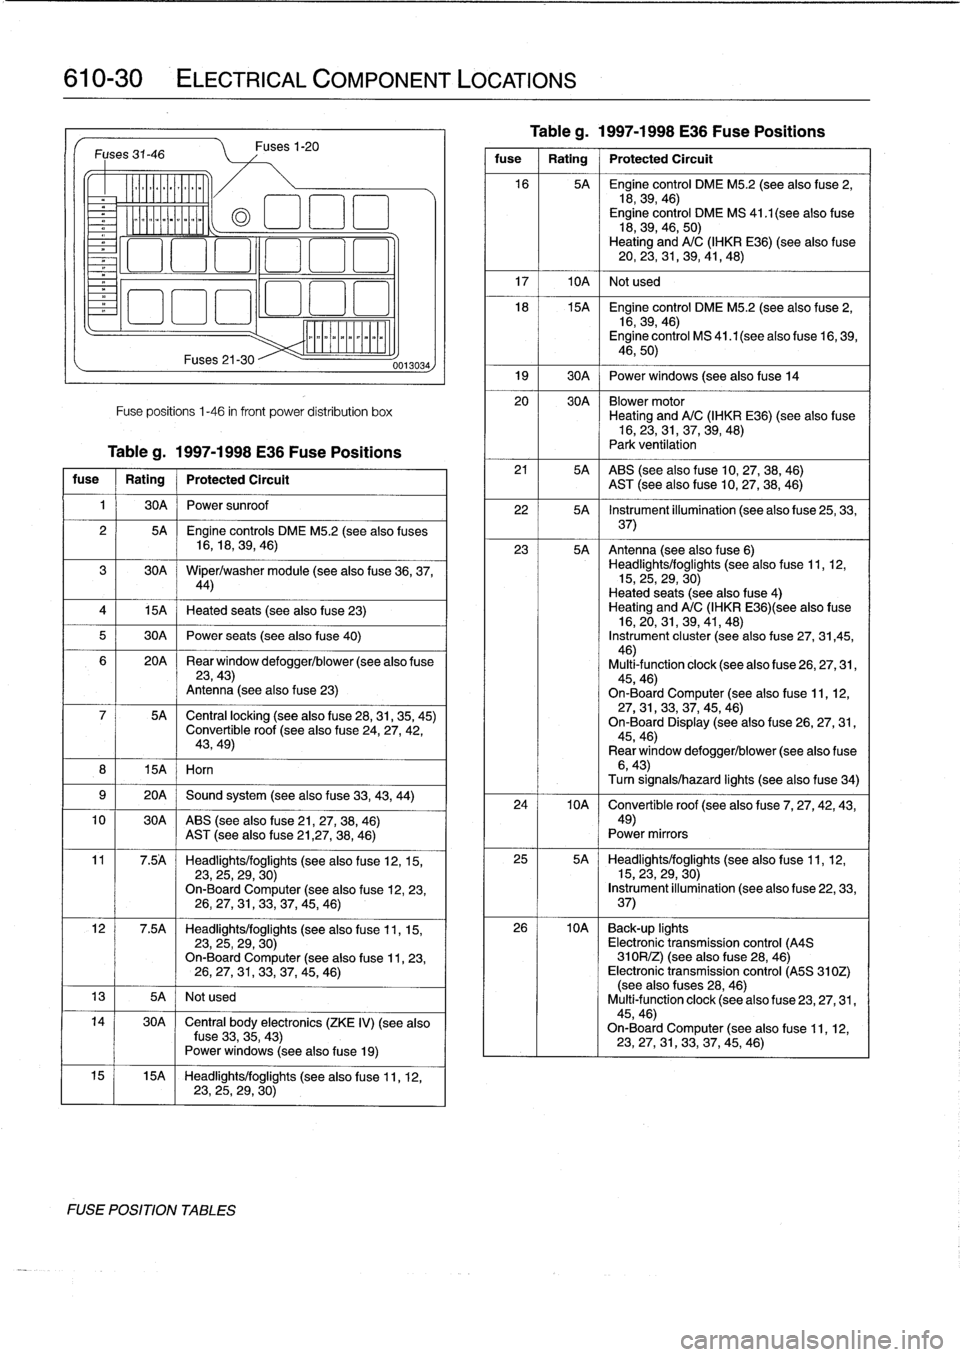 BMW 318i 1997 E36 Service Manual 
610-30

	

ELECTRICAL
COMPONENT
LOCATIONS

Fuses
31-46

v

--------------

15A
I
Horn
Fuses21-30

Fuses
1-20

Fuse
positions
1-46
in
front
power
distribution
box

Tableg
.
1997-1998
E36
Fuse
Position